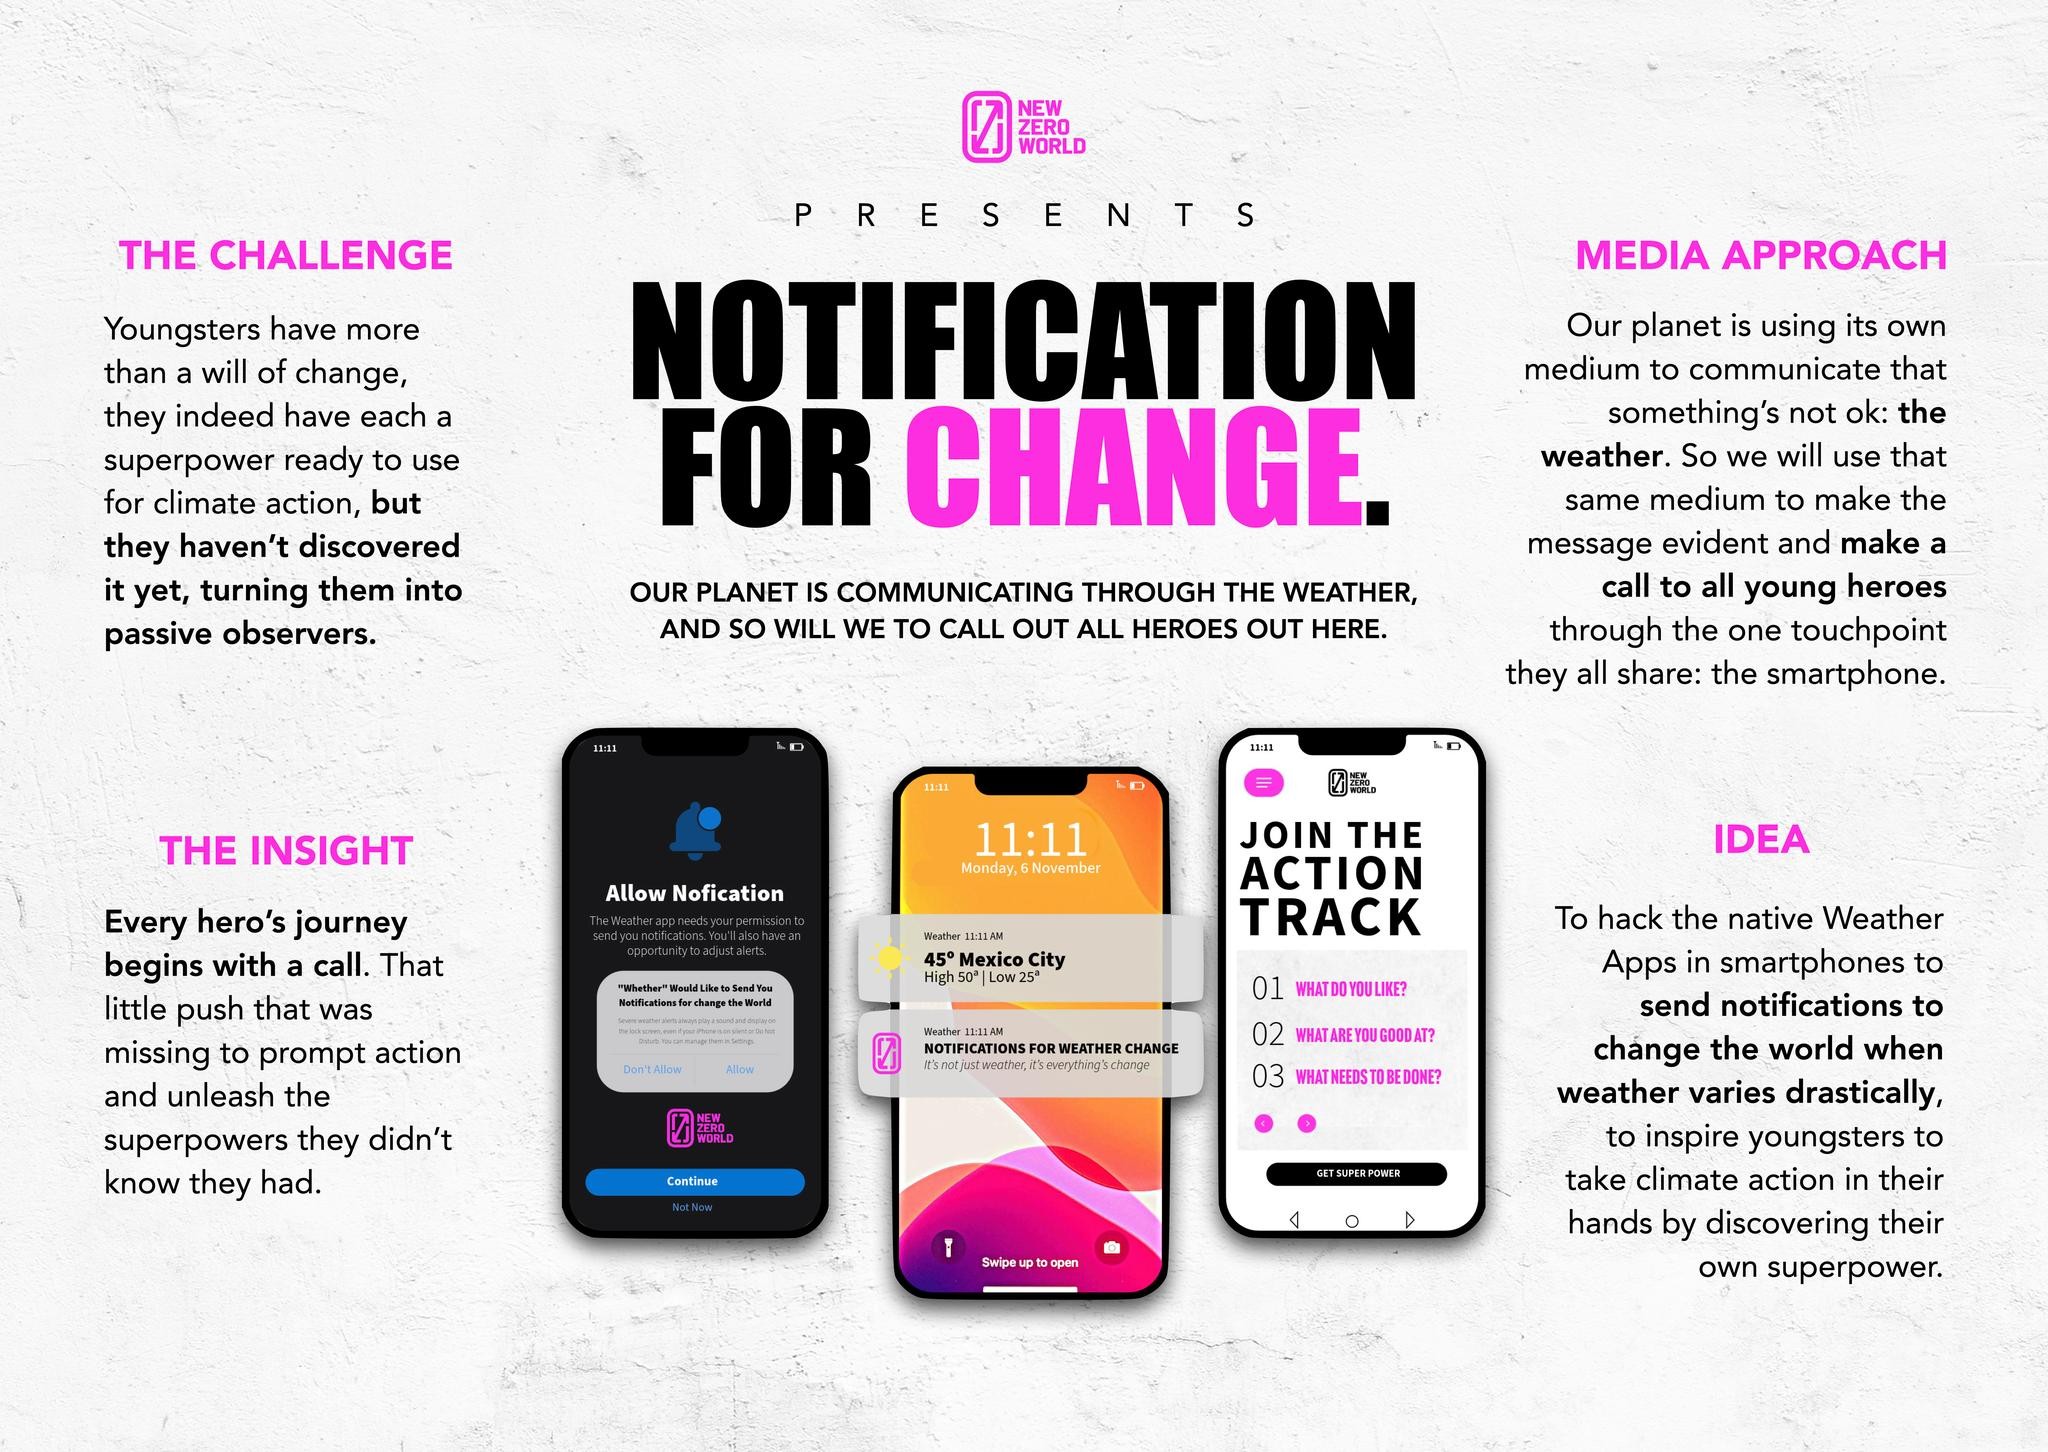 NOTIFICATION FOR CHANGE